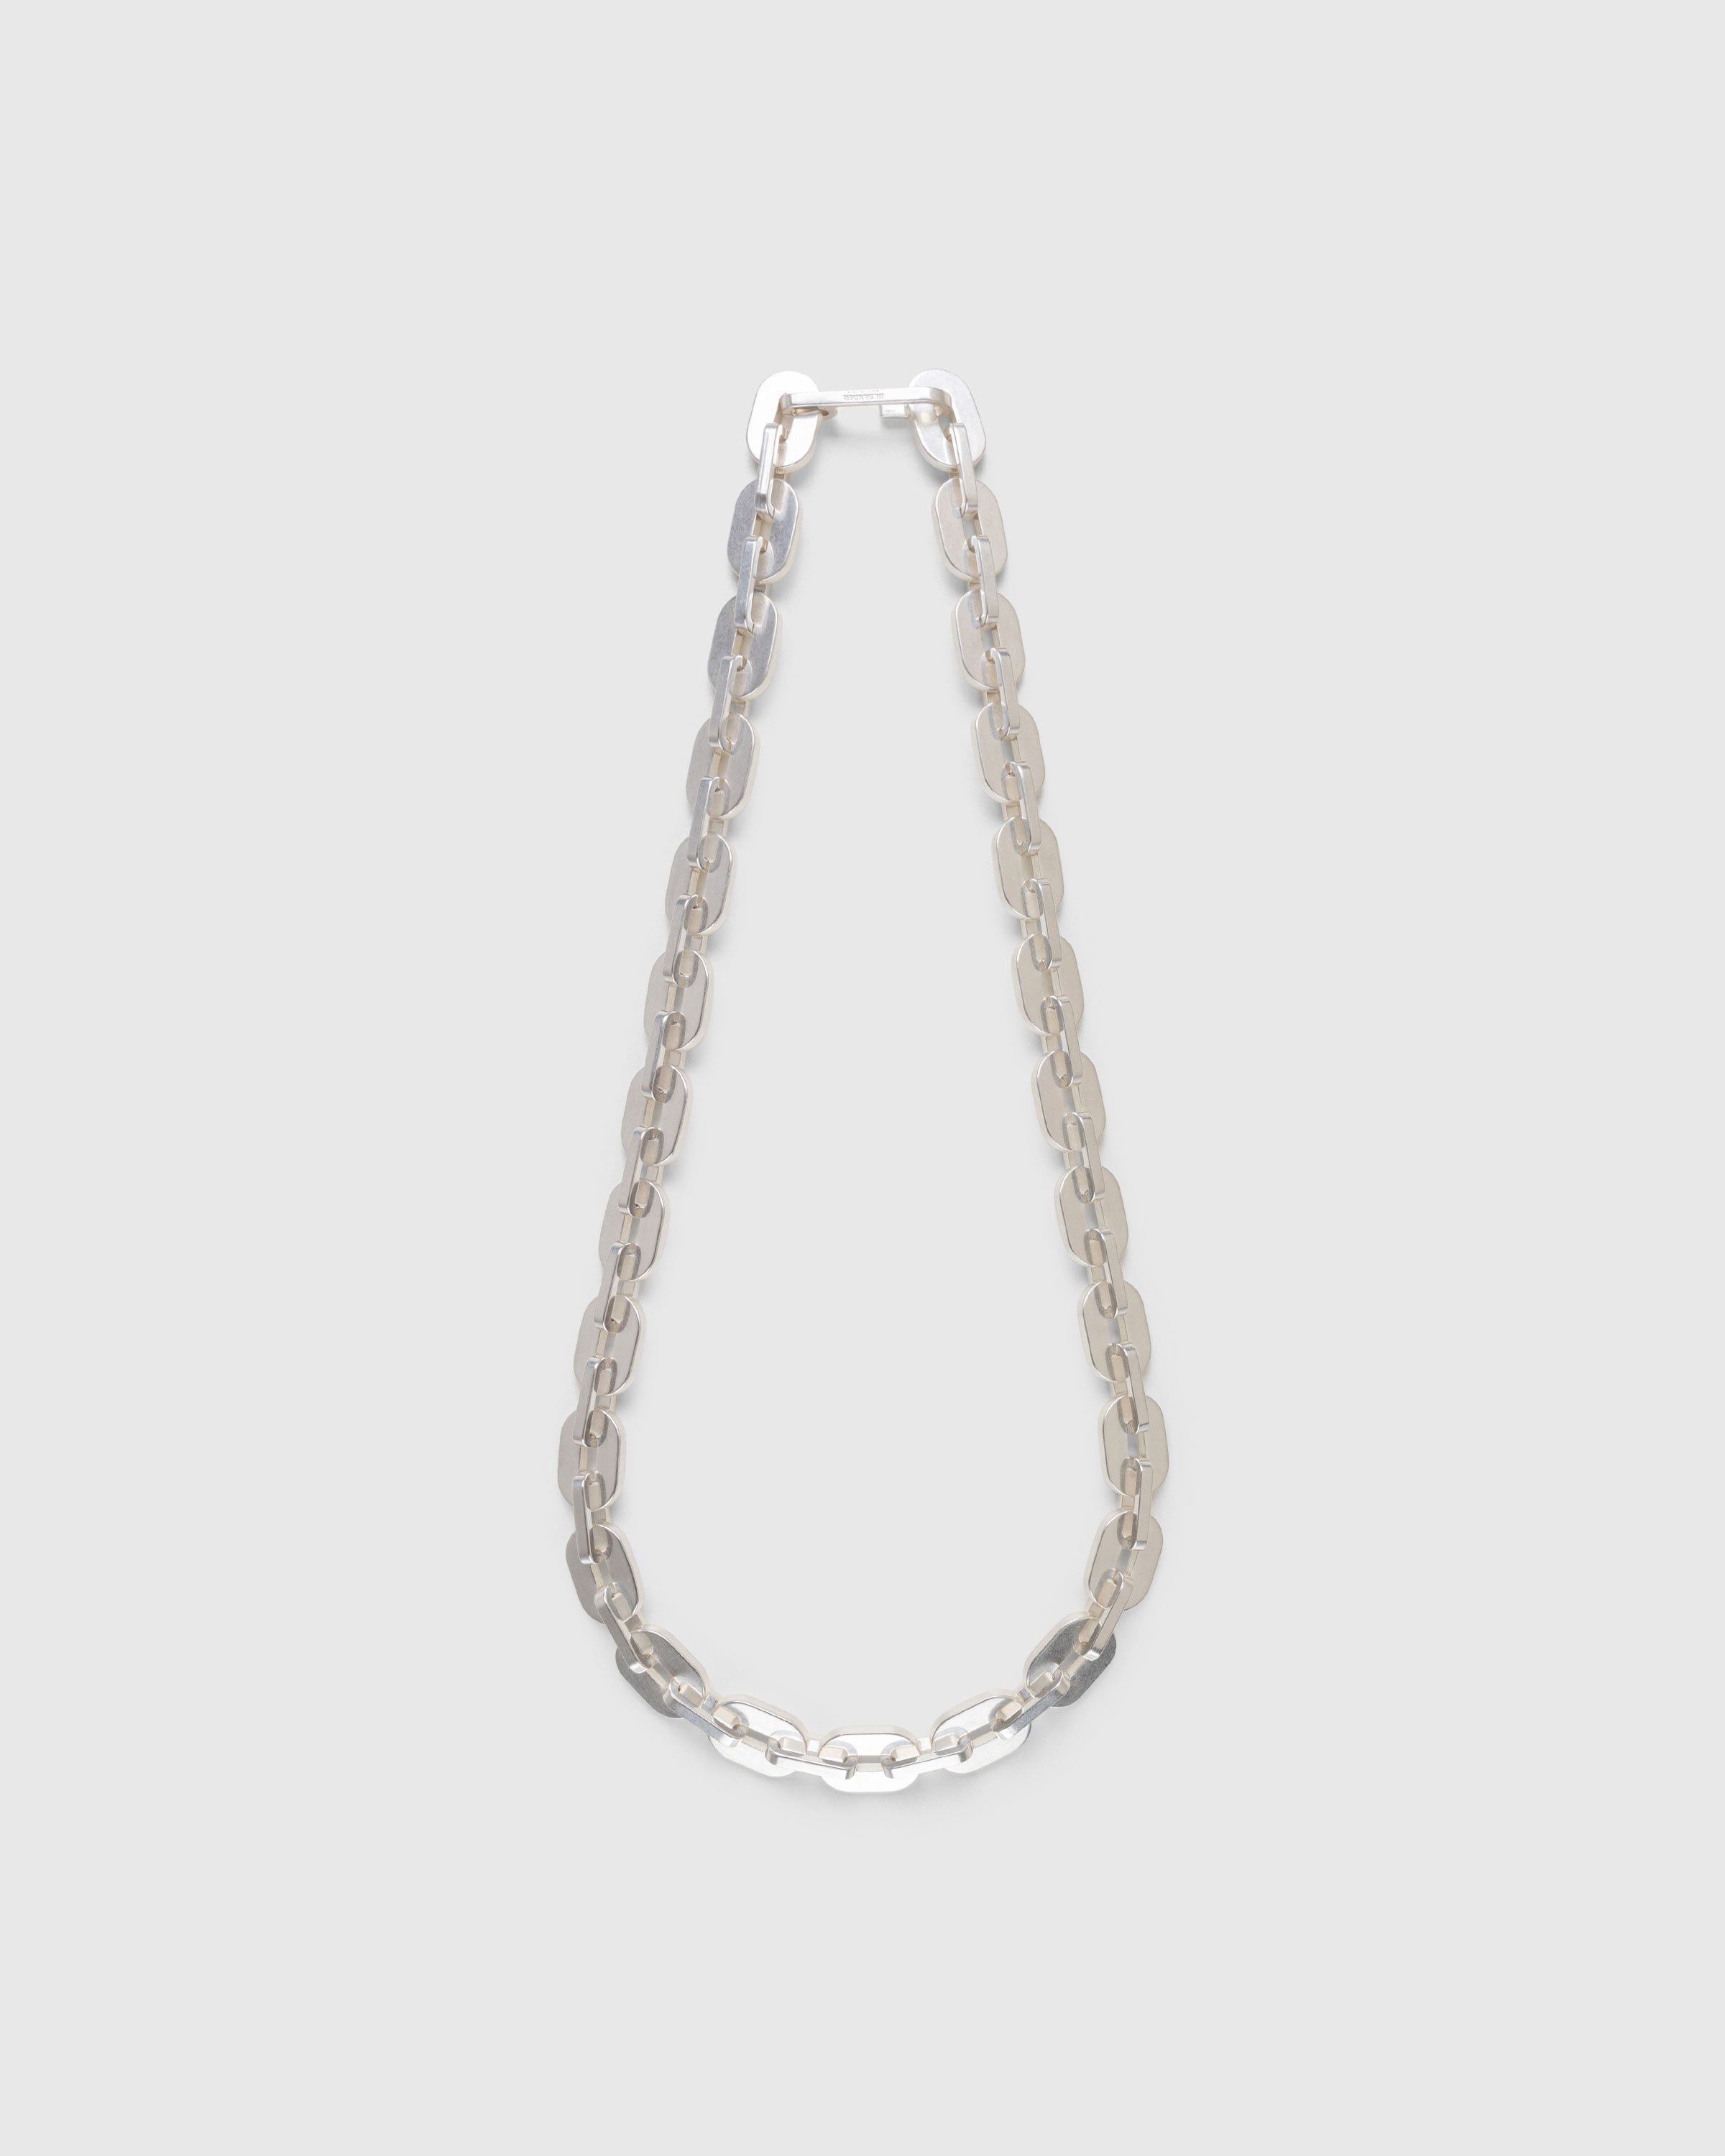 Jil Sander - Brass Chain Necklace Silver - Accessories - Silver - Image 1